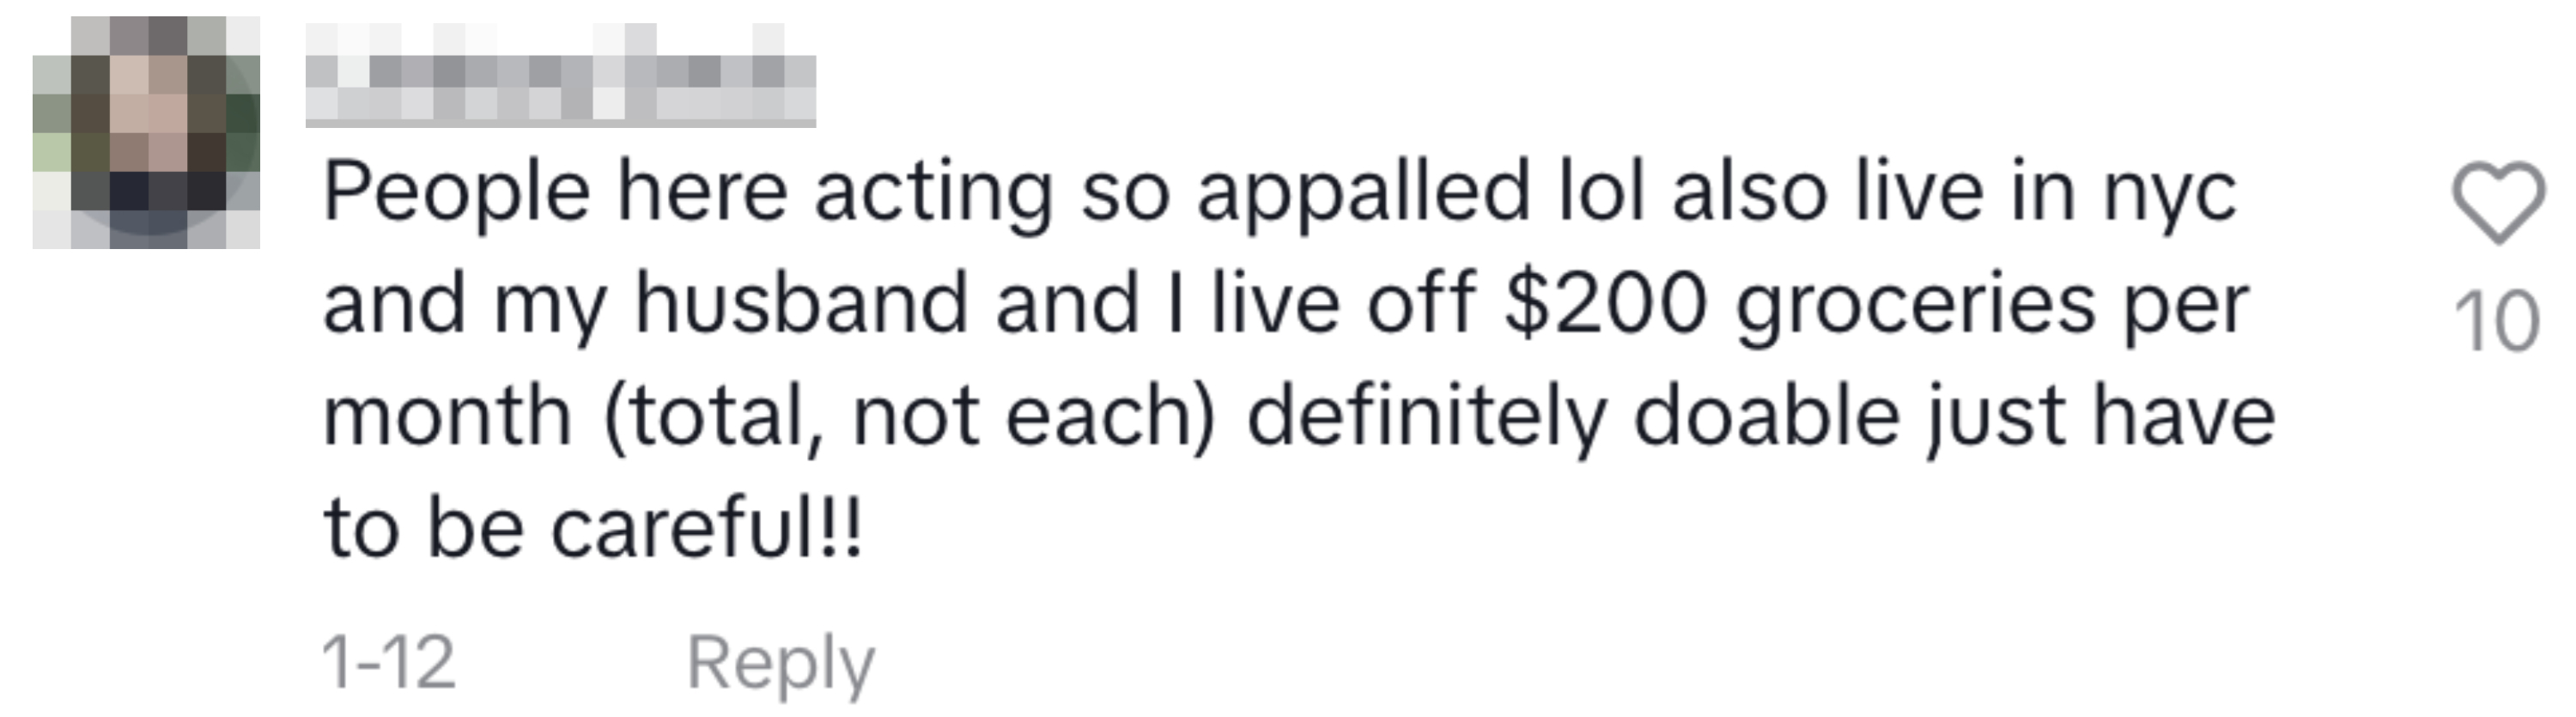 A comment on Maria&#x27;s TikTok: &quot;People here acting so appalled lol also live in nyc and my husband and I live off $200 groceries per month (total, not each) definitely doable just have to be careful!&quot;